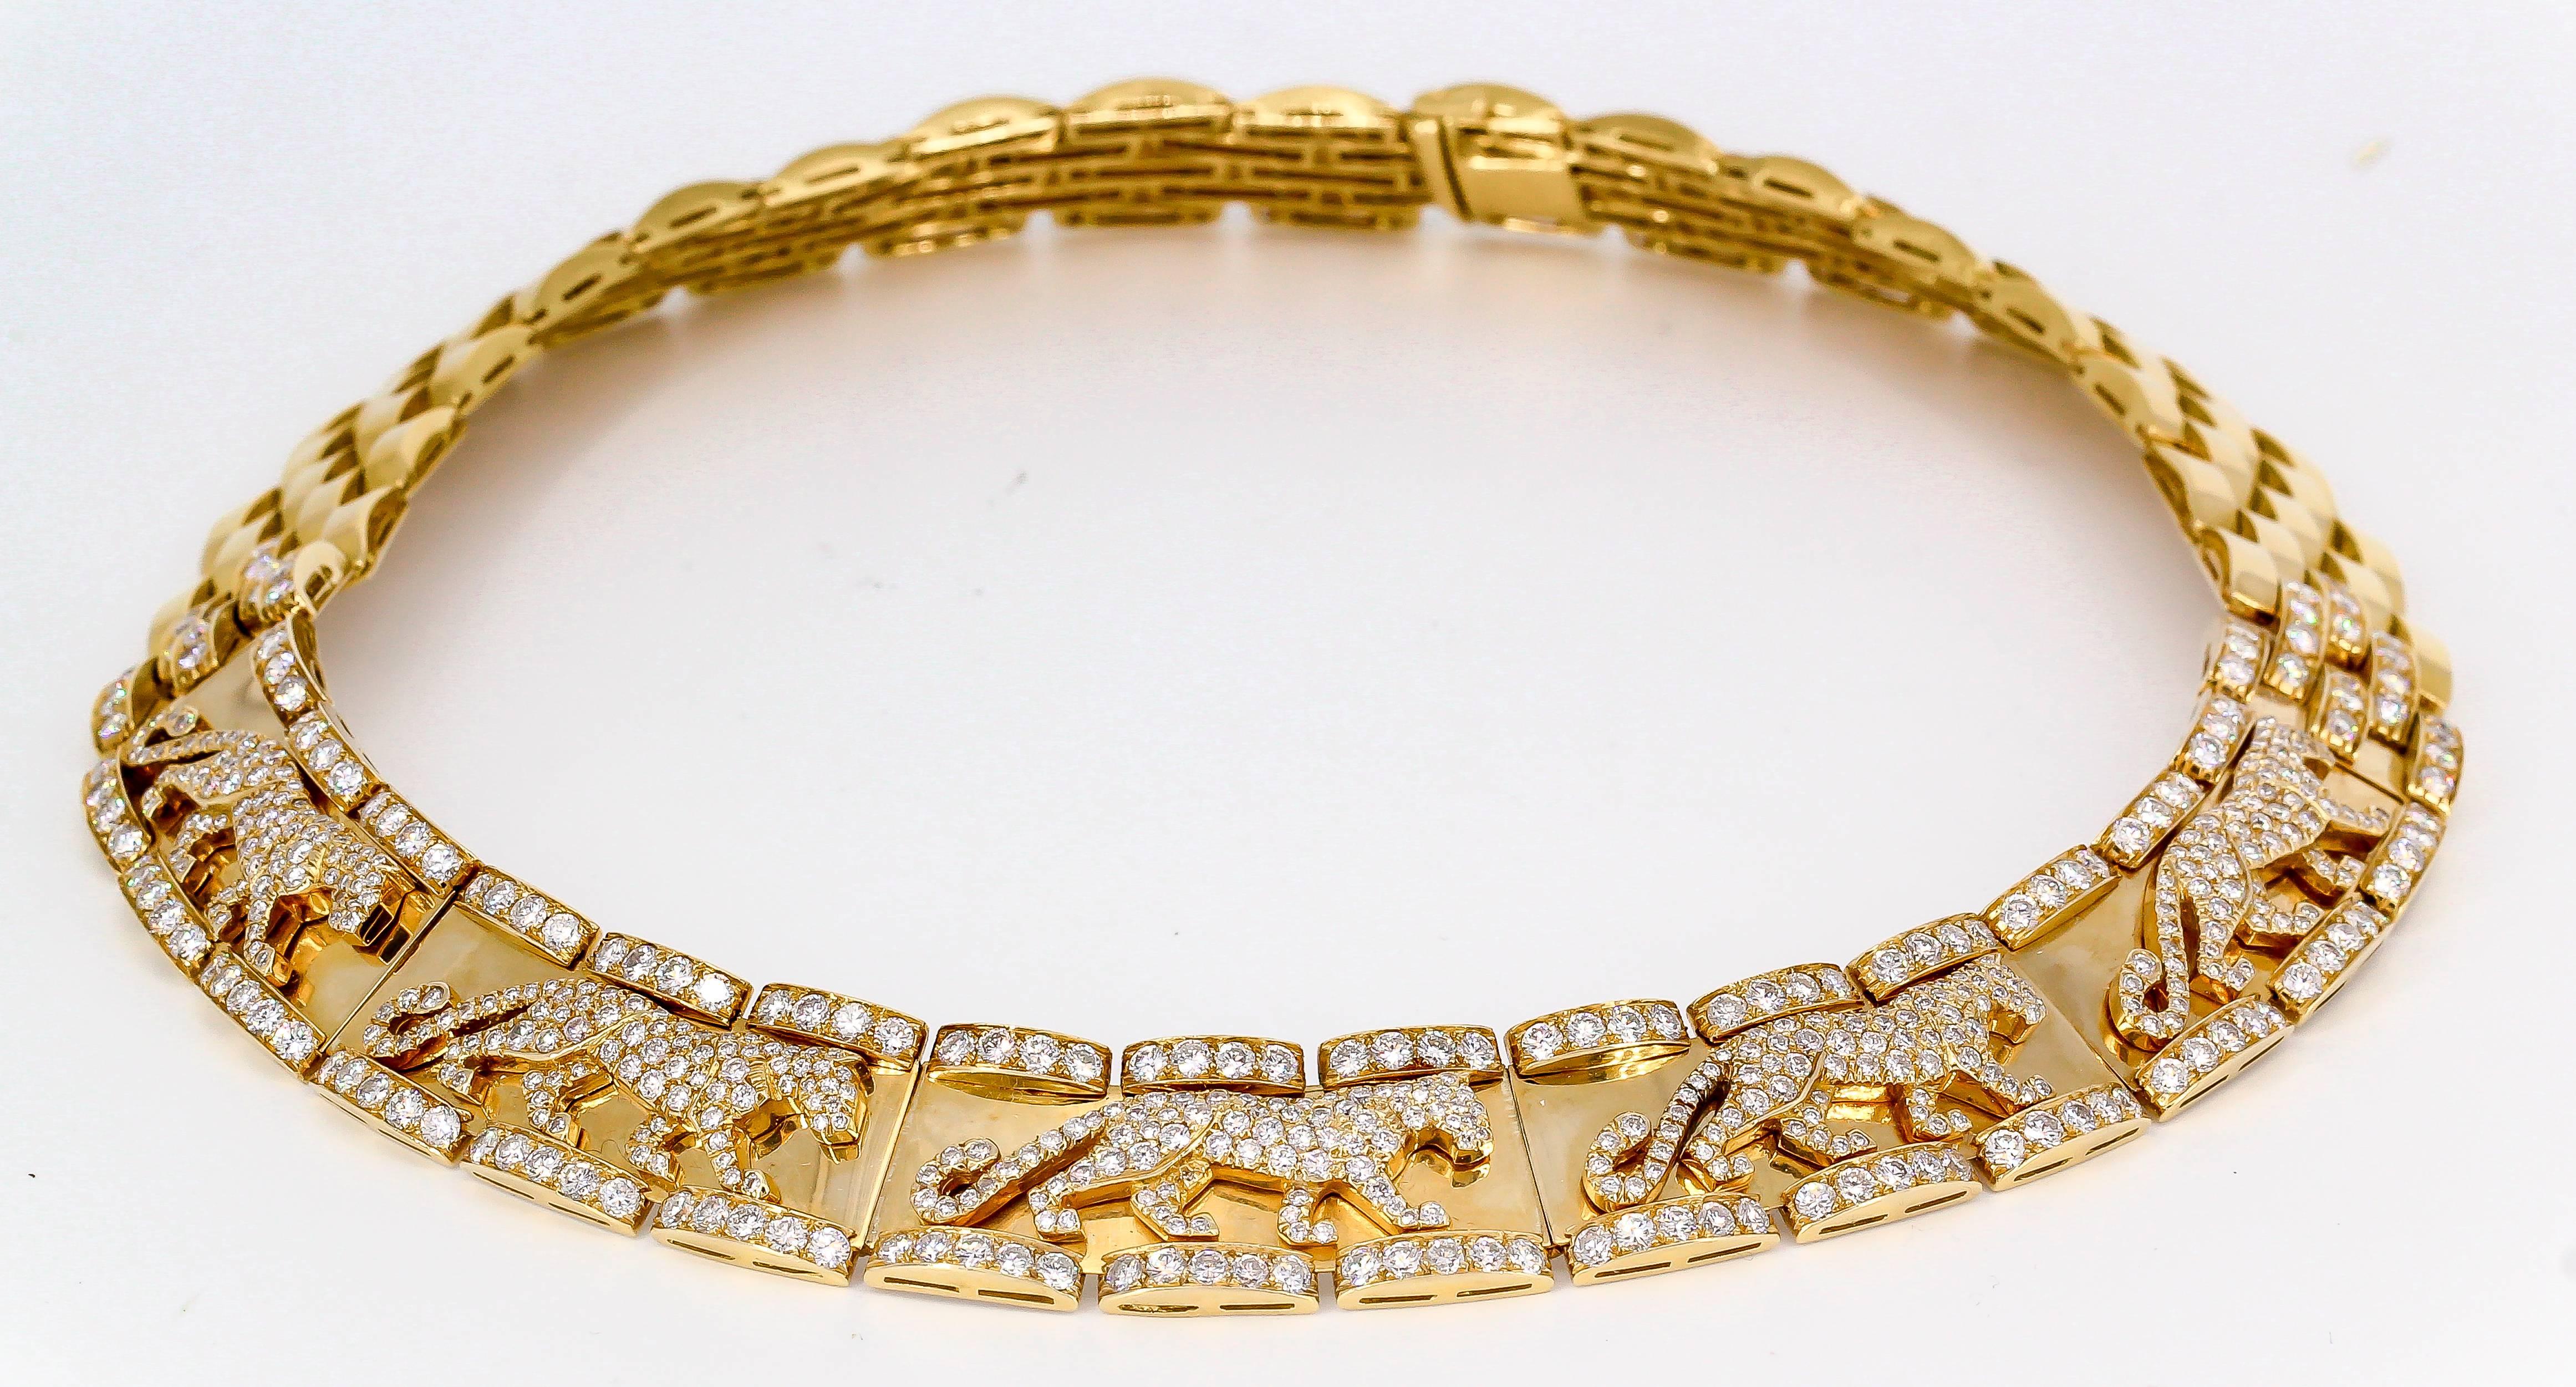 Impressive and rare diamond and 18K yellow gold necklace from the 